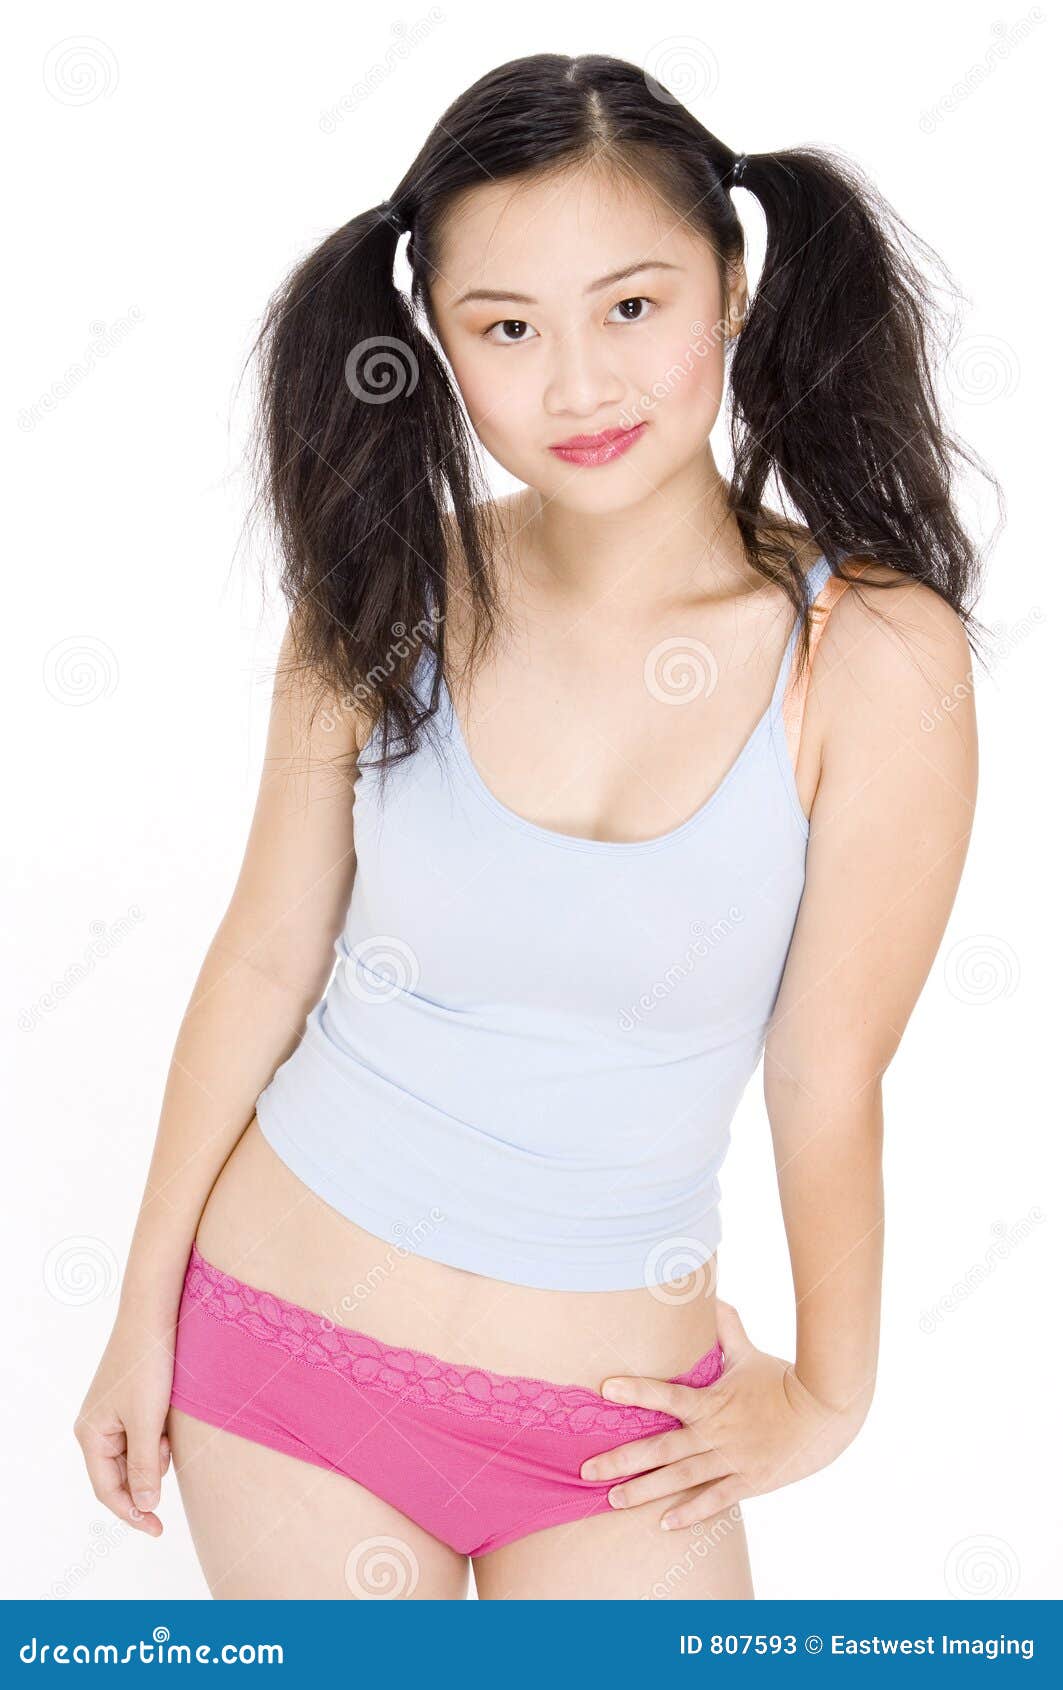 Tiny Little Asian Pussy - Colorful Teen stock image. Image of female, pose, woman - 807593